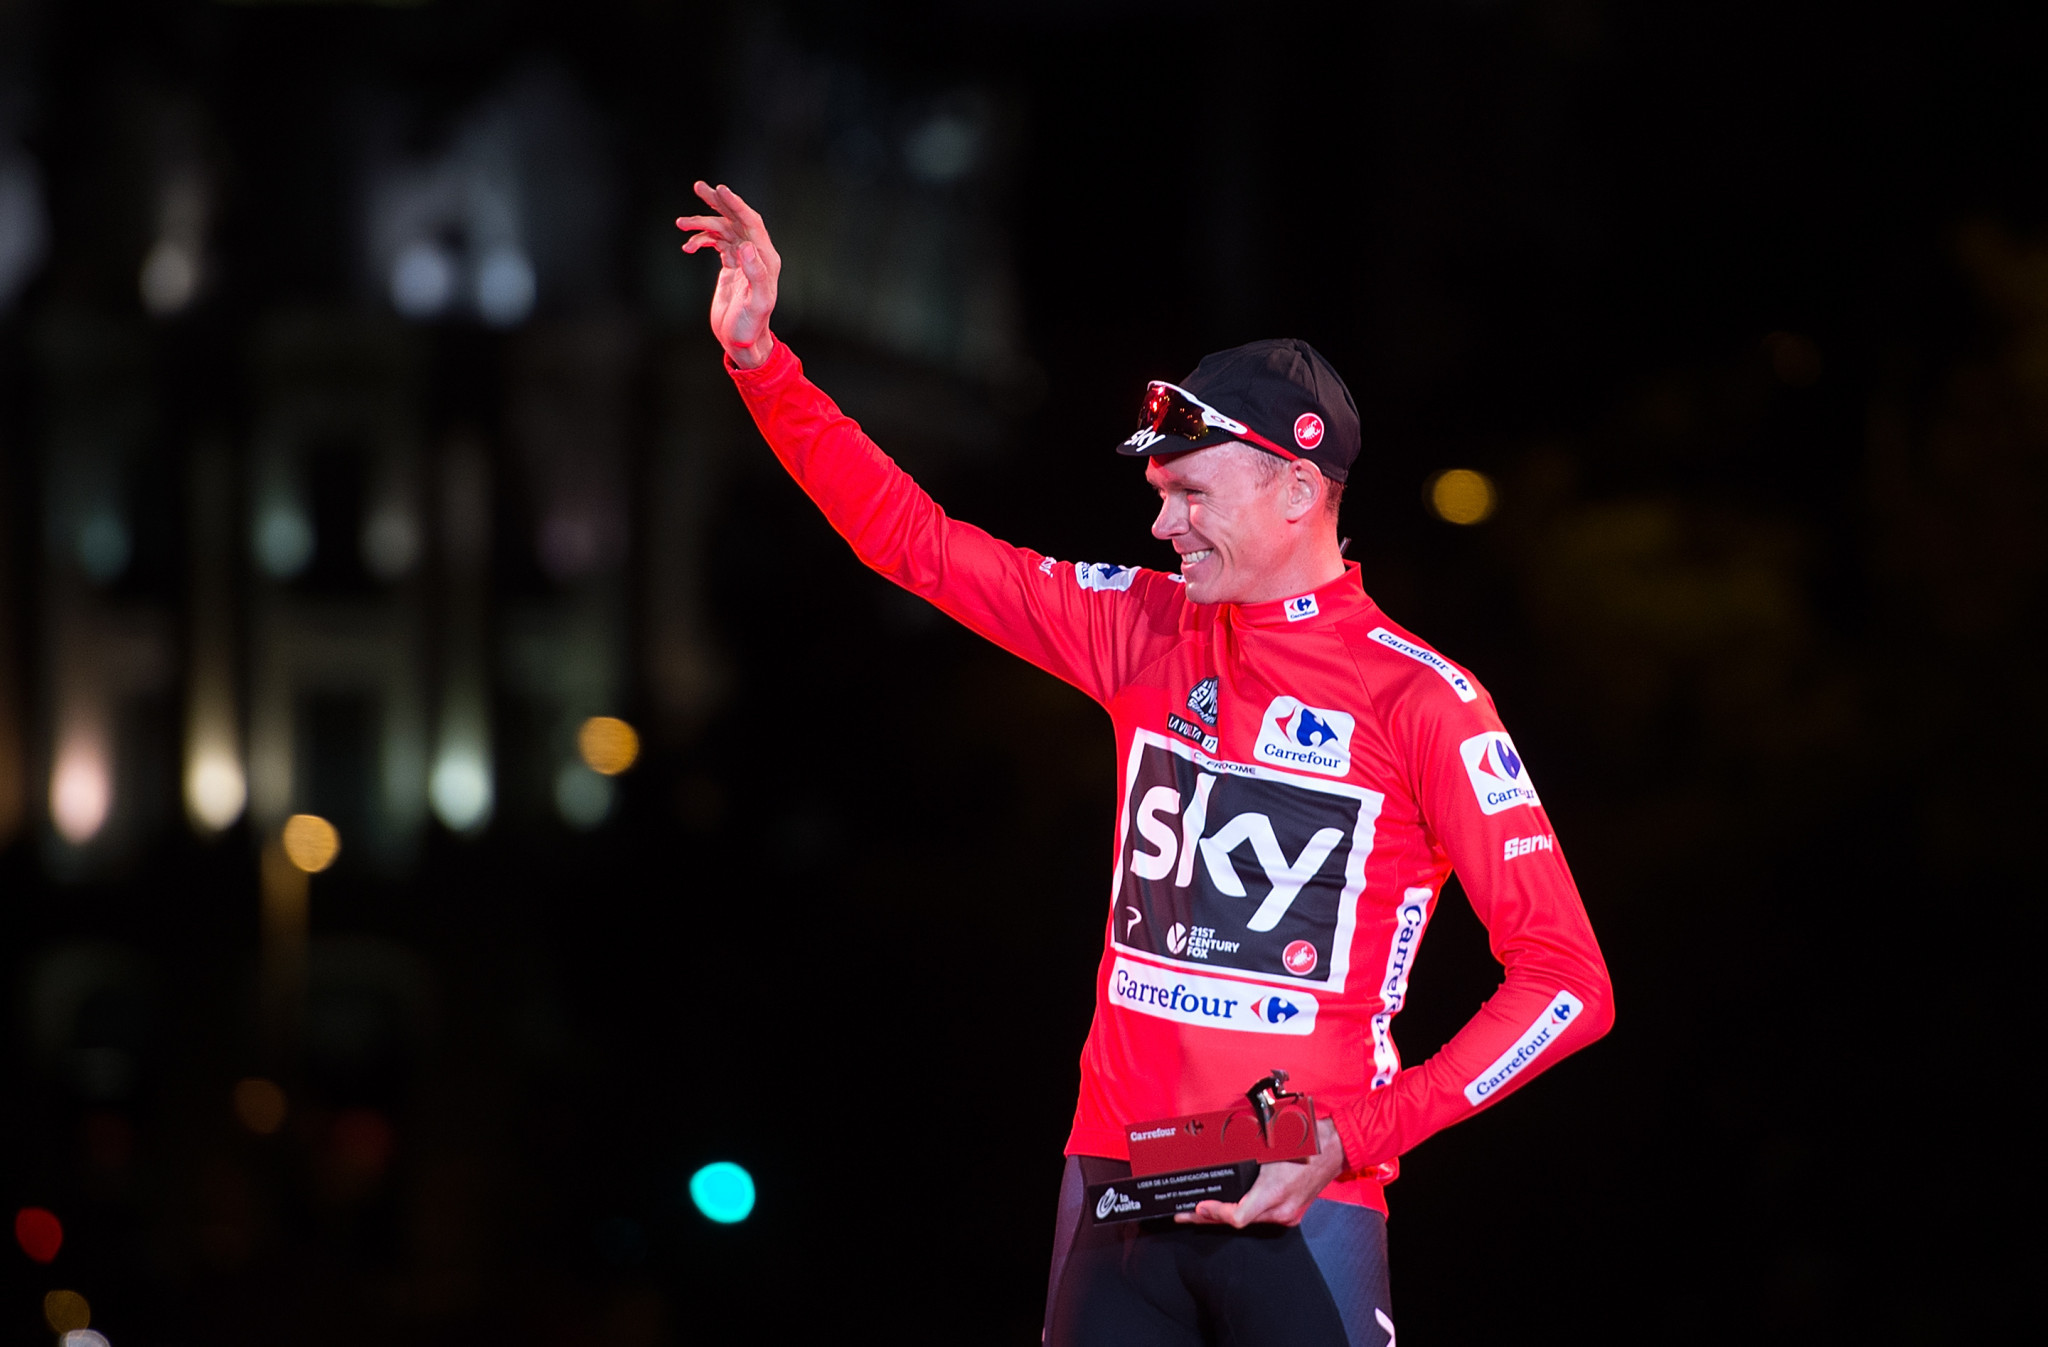 Chris Froome, wearing the Vuelta leader's red jersey, has denied all wrongdoing and has pledged to clear his name ©Getty Images